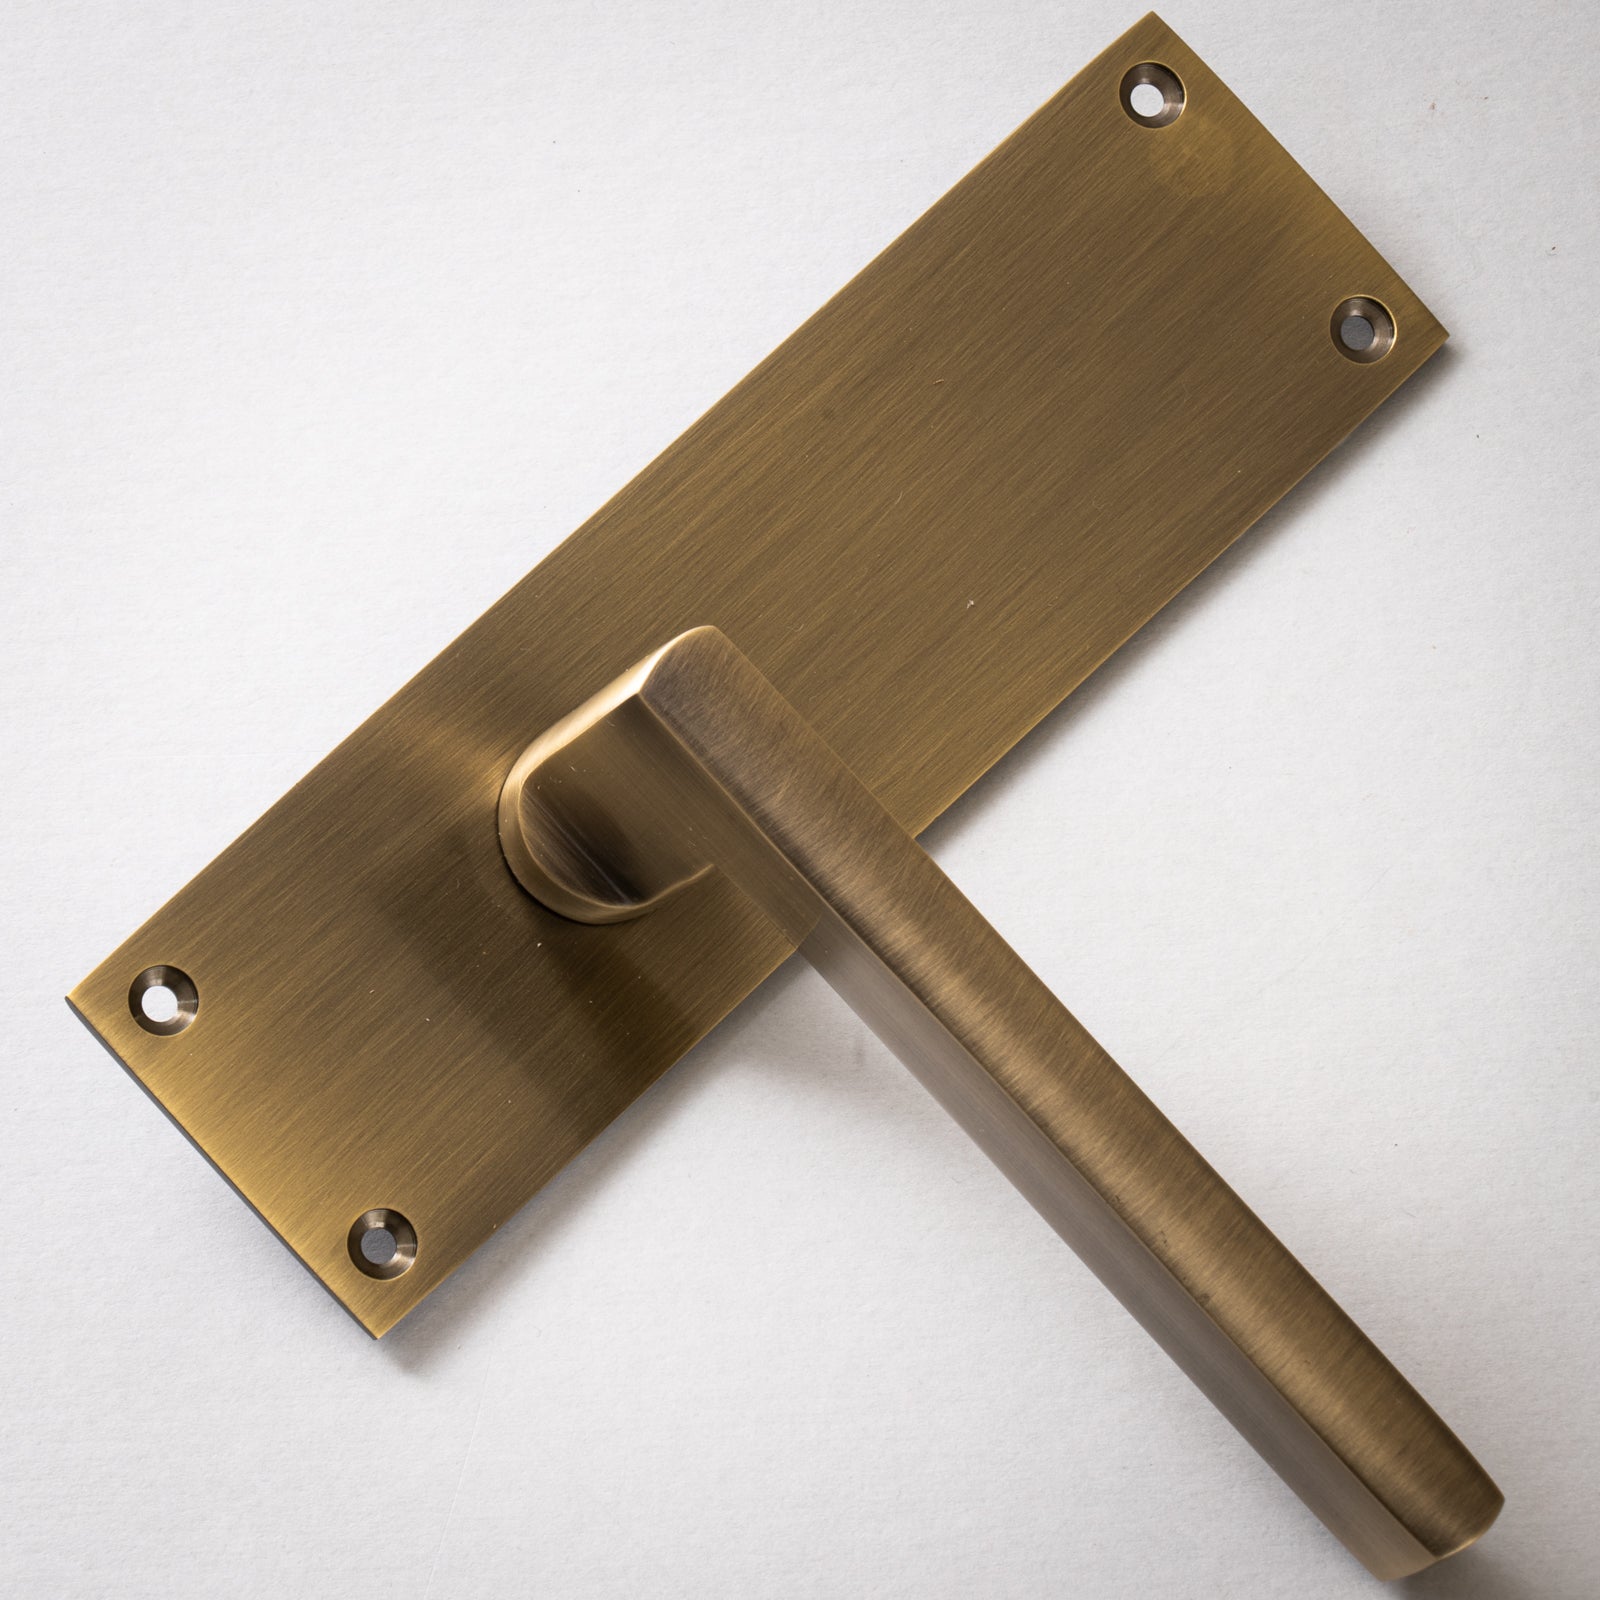 Trident Door Handles On Plate Latch Handle in Aged Brass SHOW